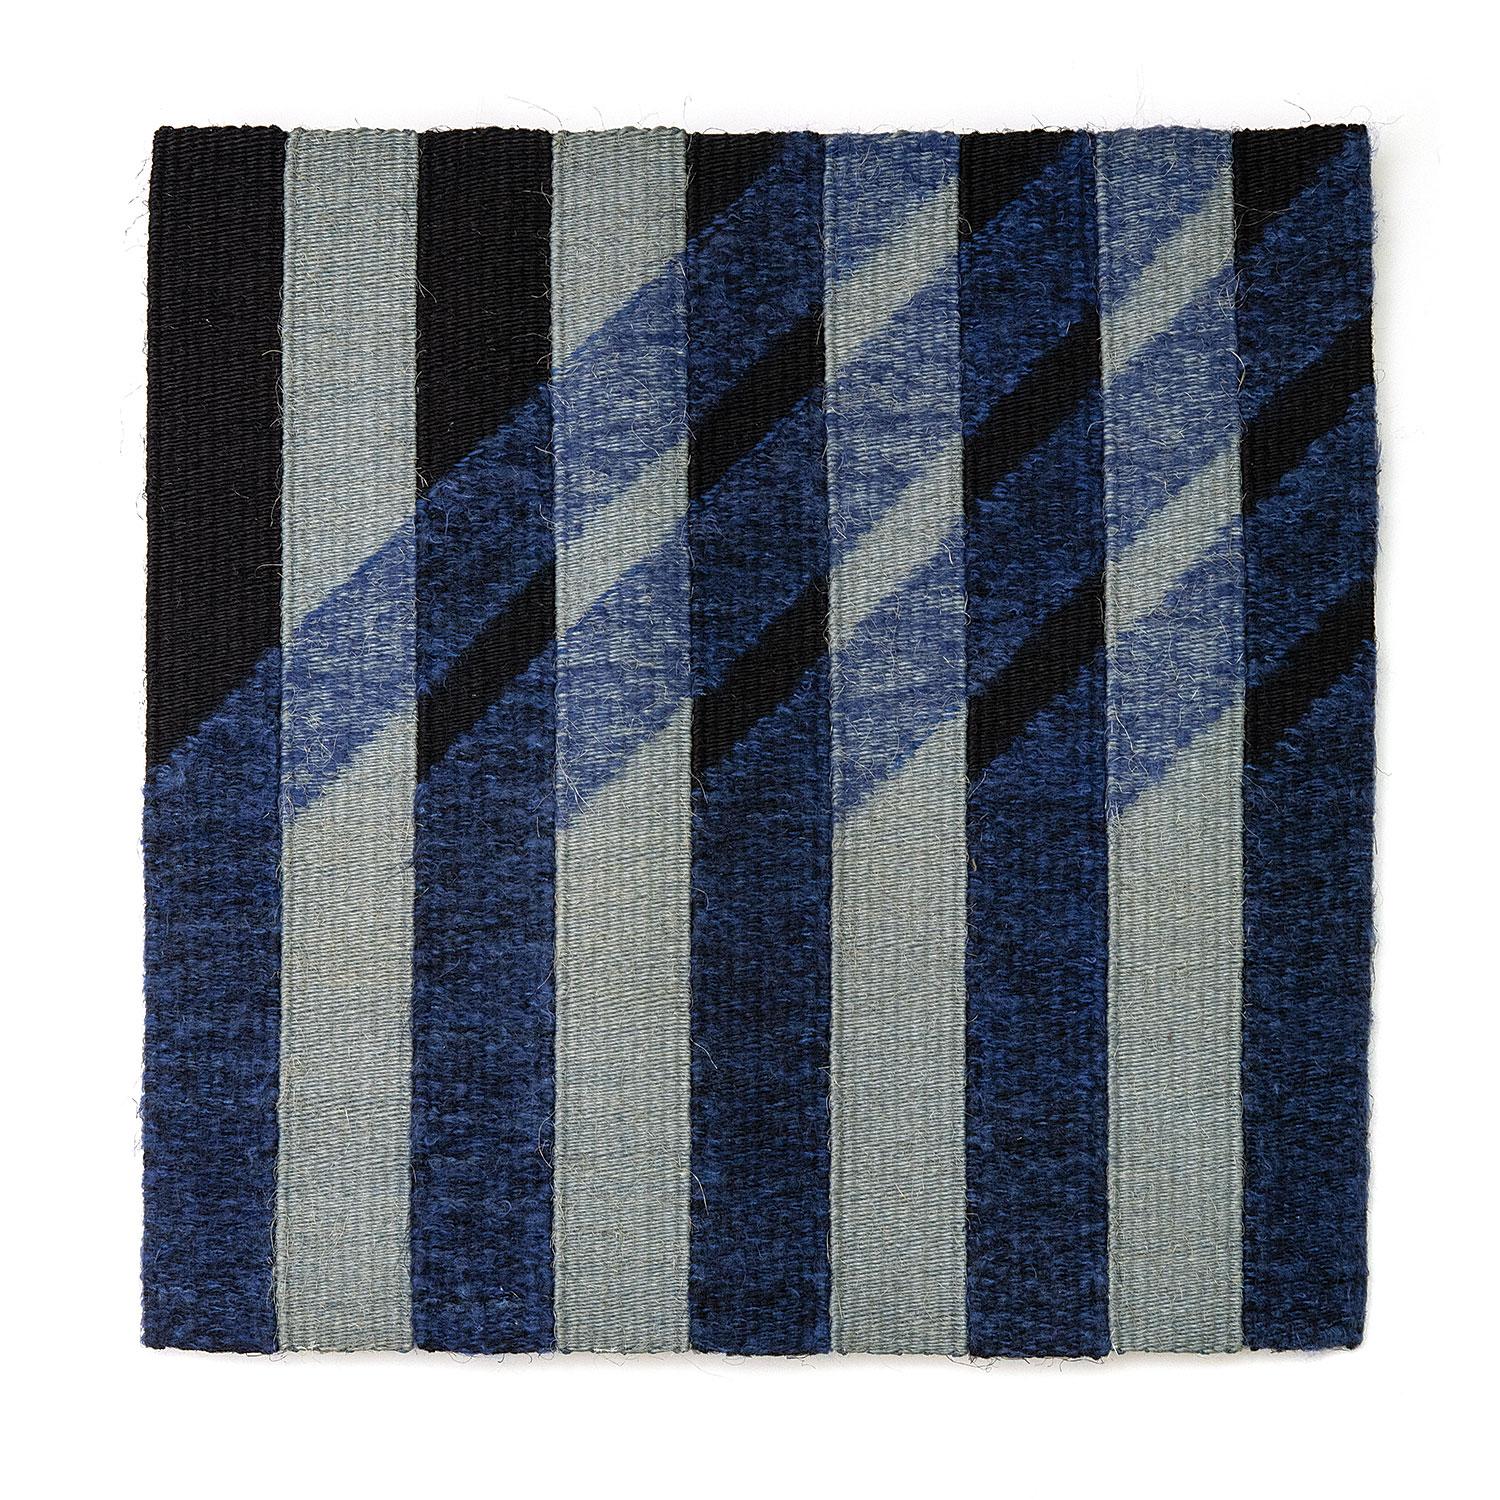 Angled Blue, Contemporary Geometric Tapestry by Adela Akers